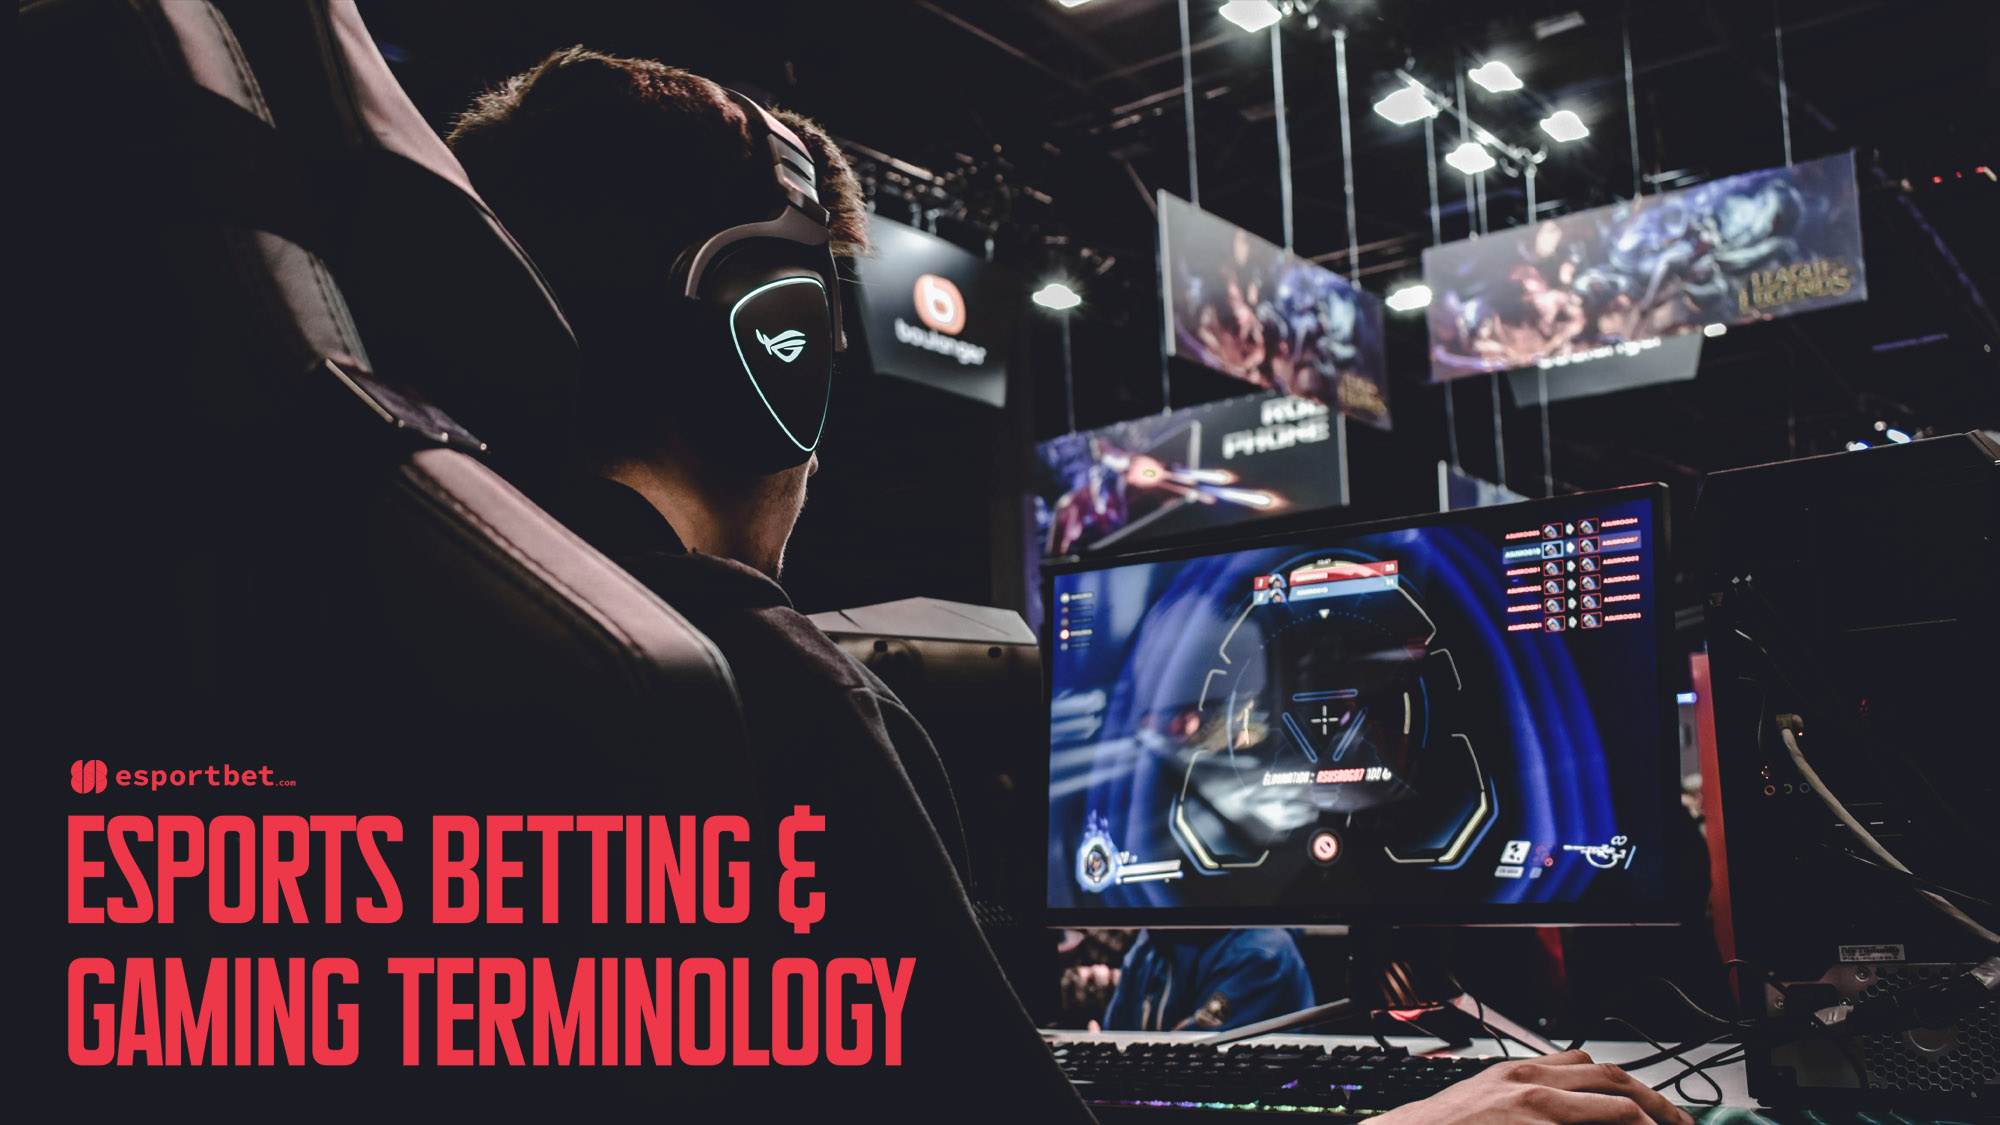 Esports glossary of terms